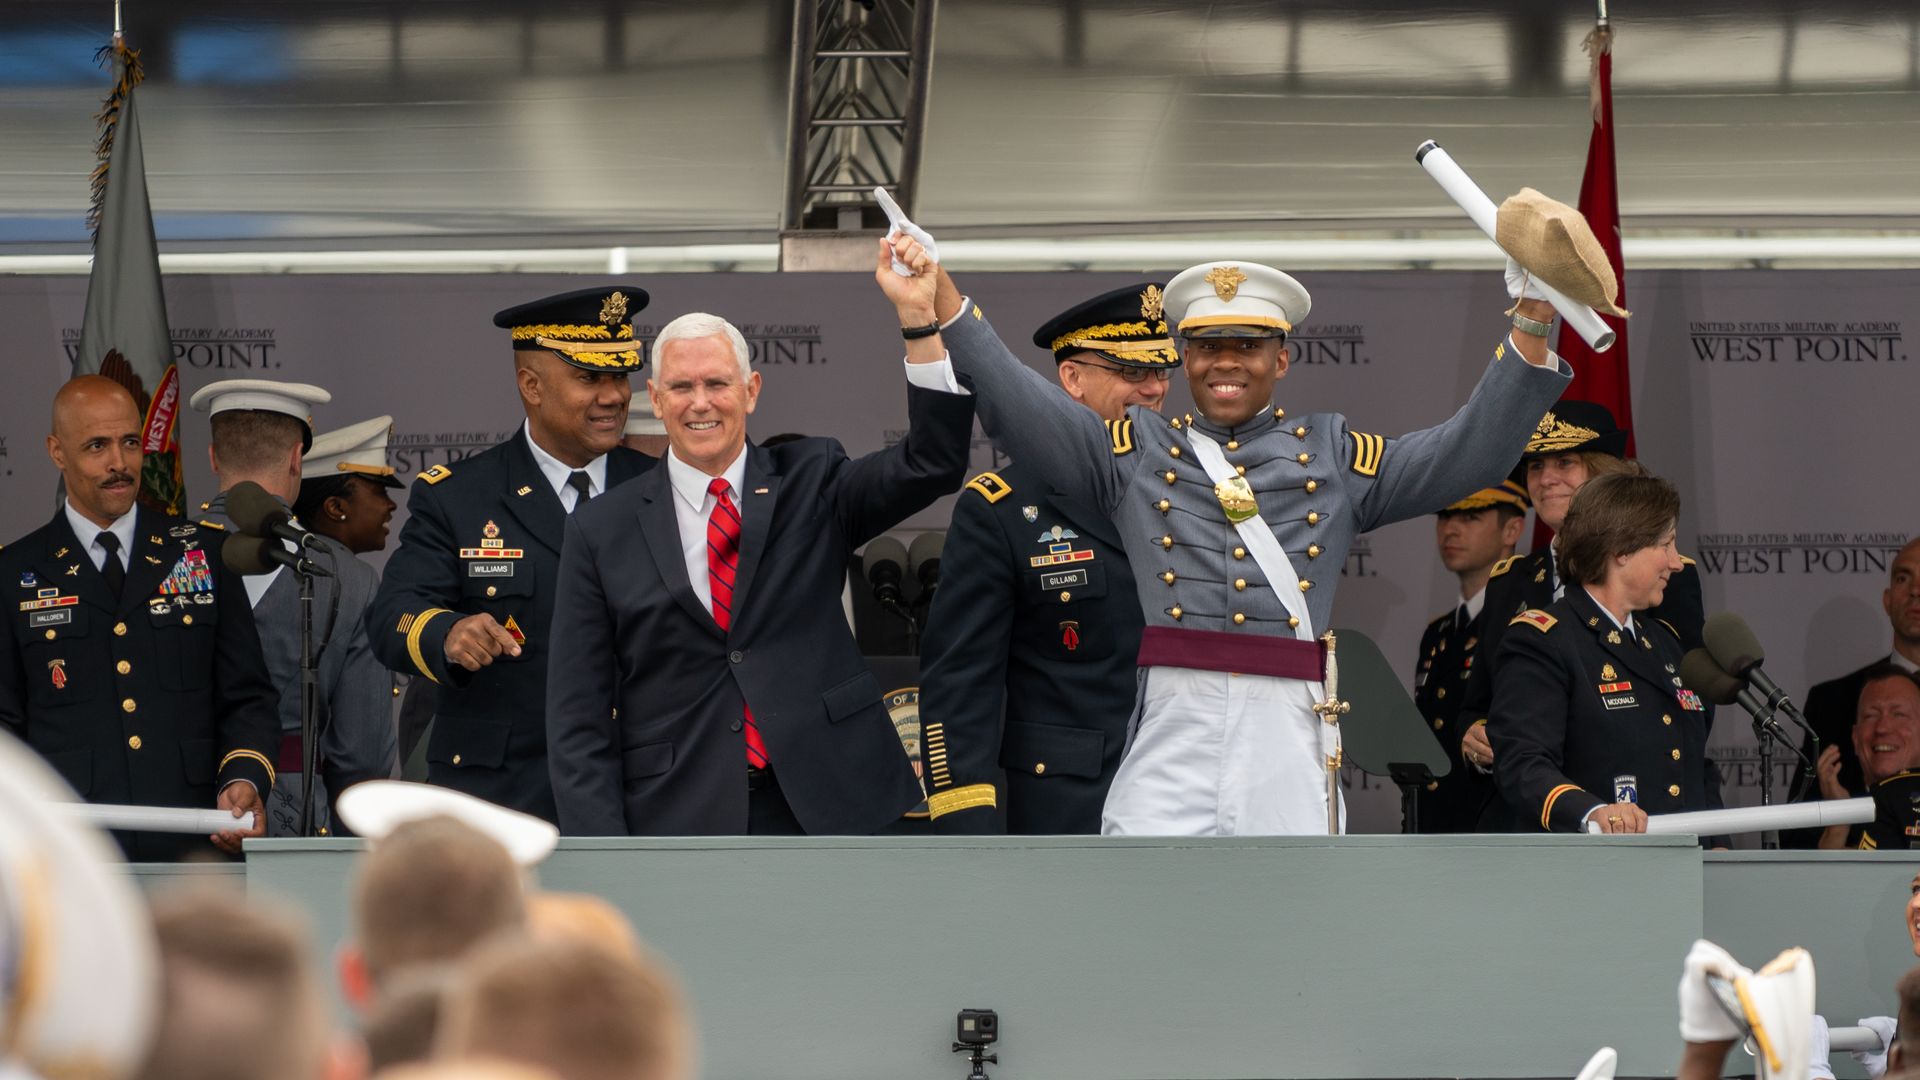 Mike Pence at the 2019 West Point graduation